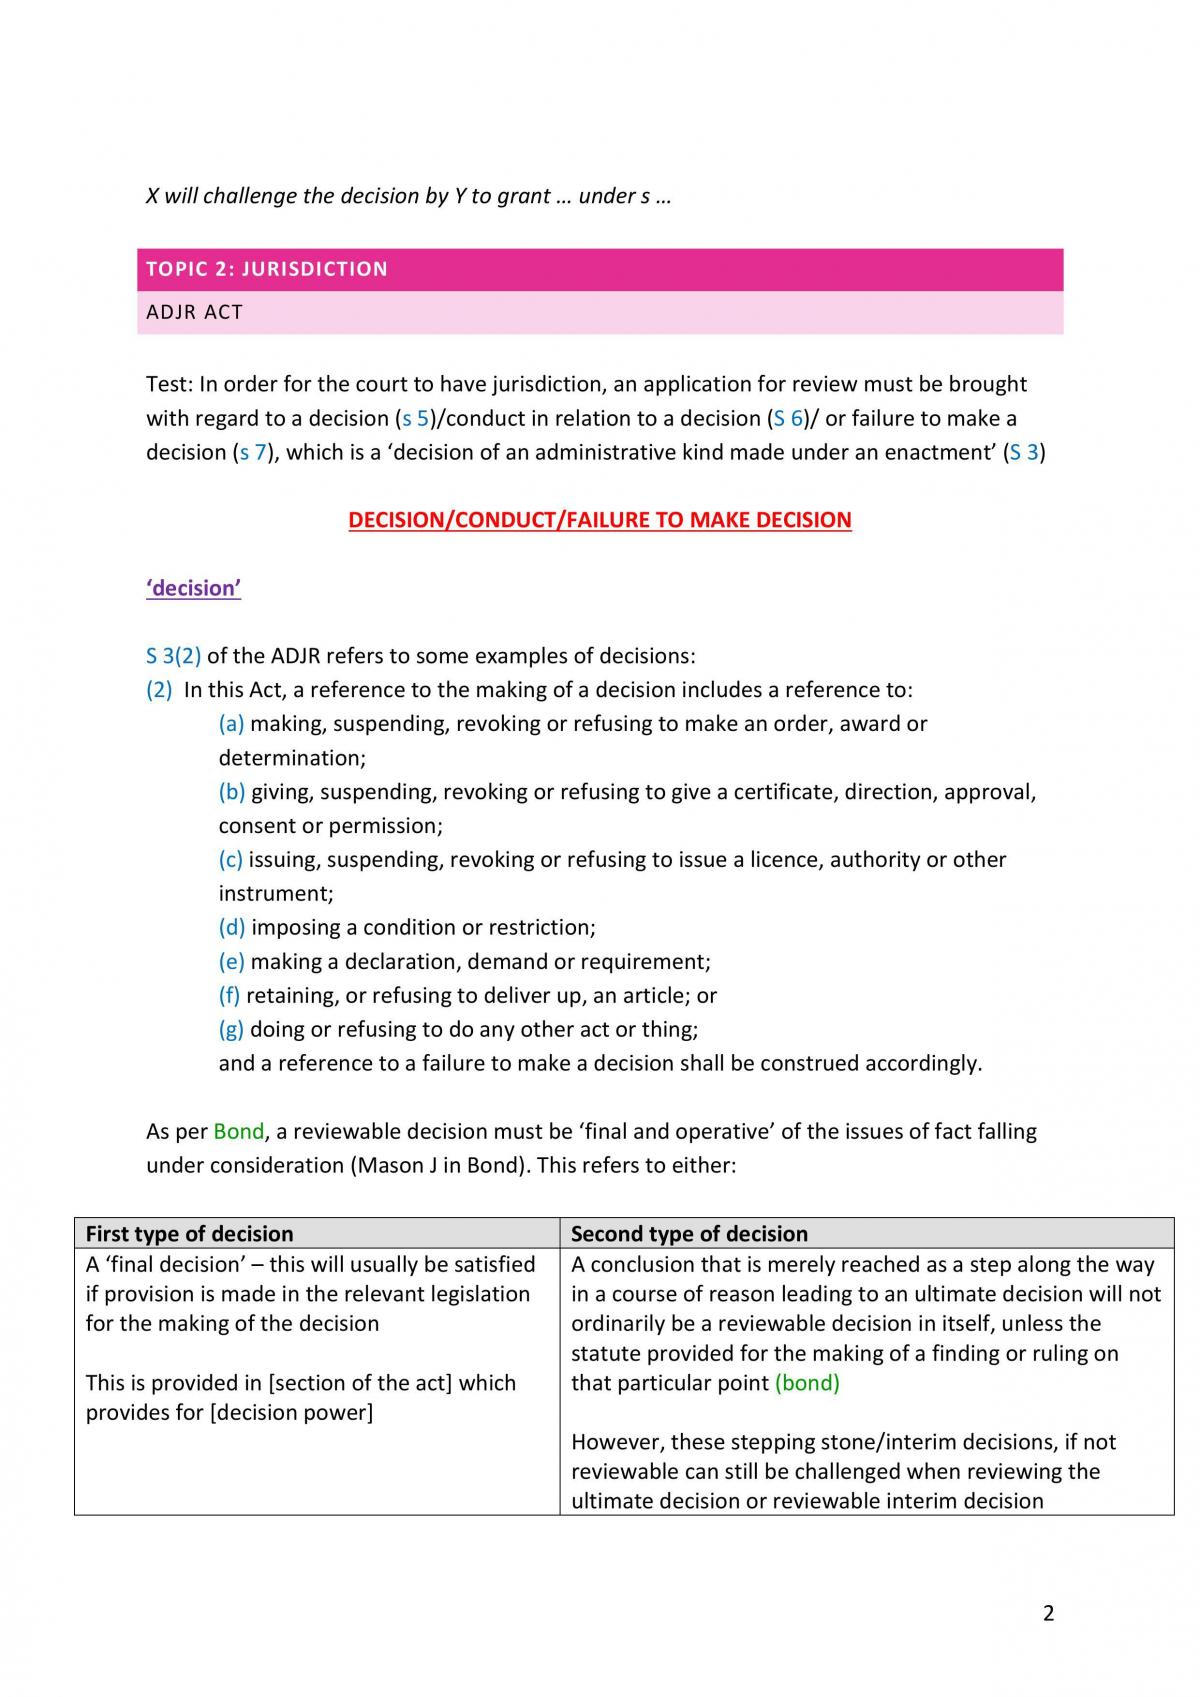 LAW4331 Exam notes (Administrative Law) - Page 3